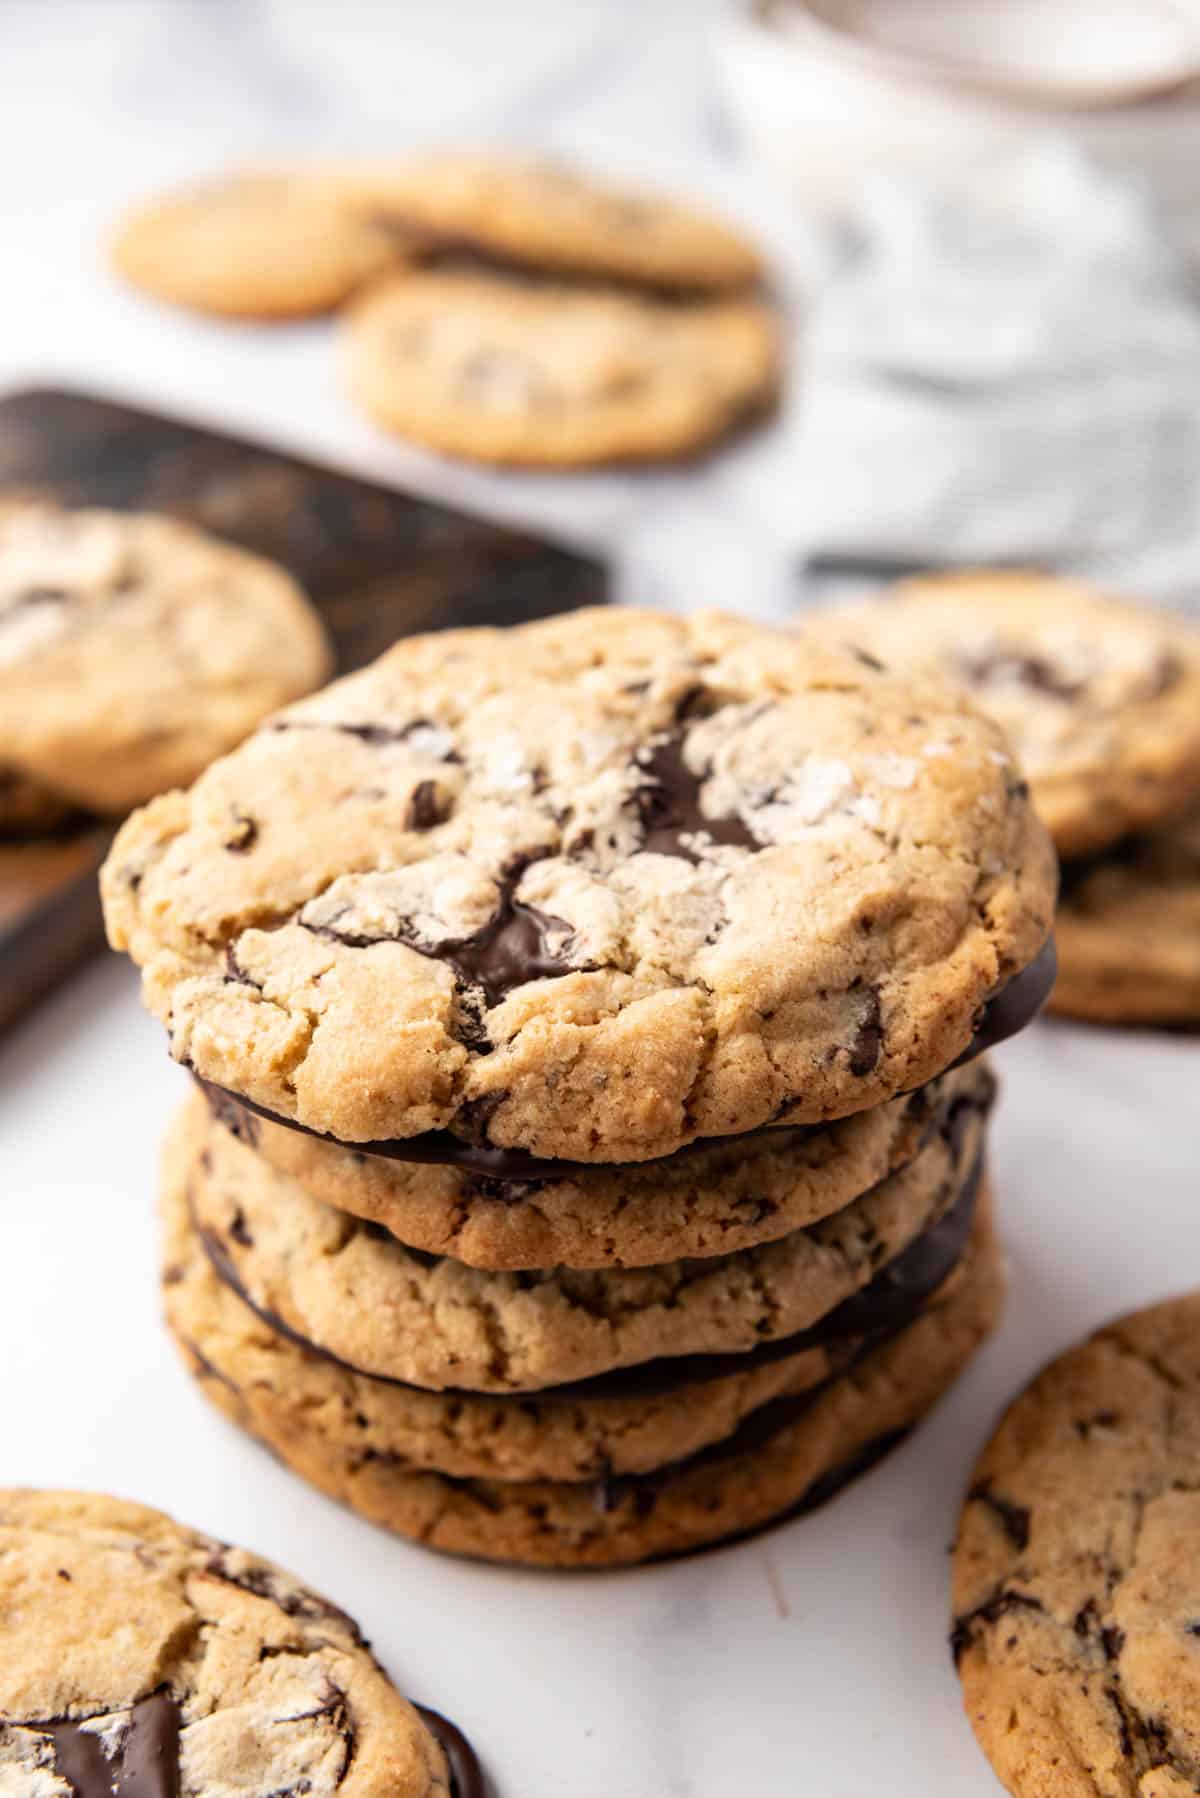 An image of a stack of Jacques Torres chocolate chip cookies with chocolate bottoms.